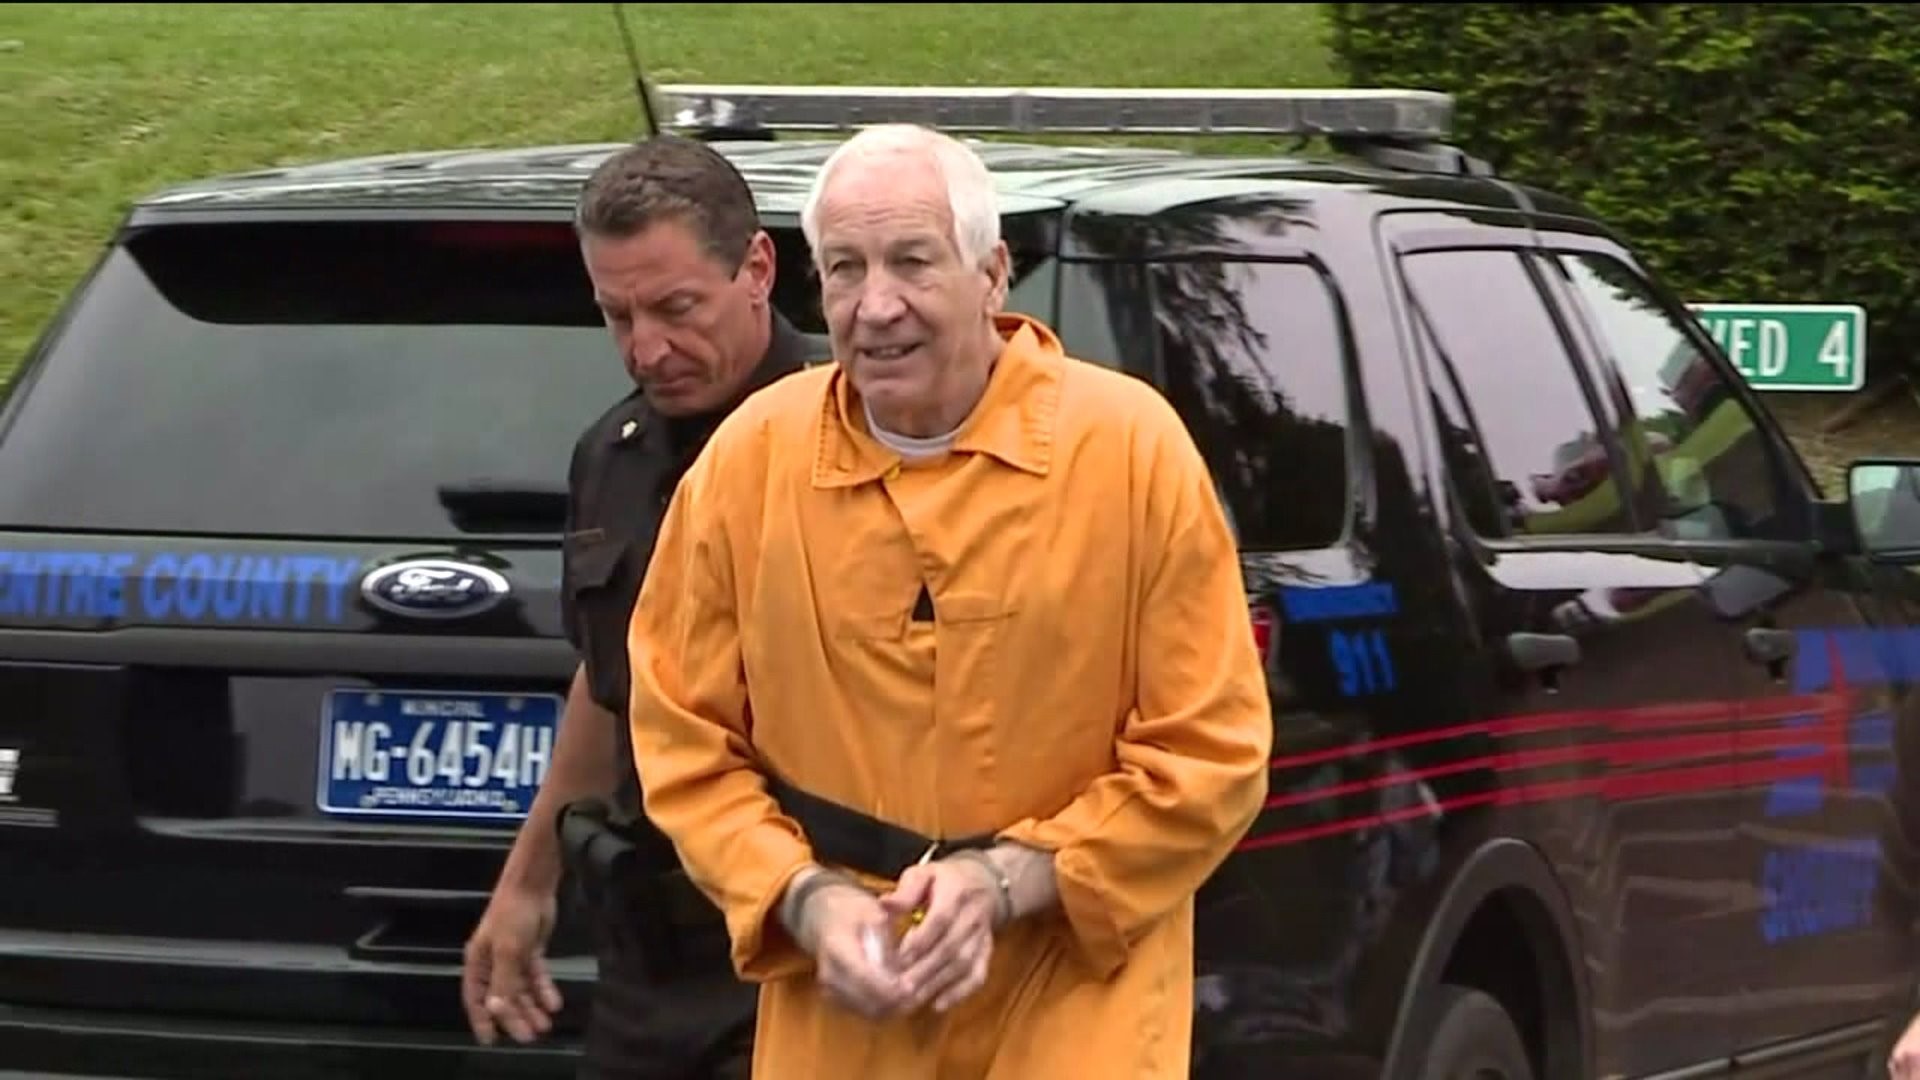 A federal judge recommends former Penn State football coach Jerry Sandusky's latest appeal be dismissed as premature.